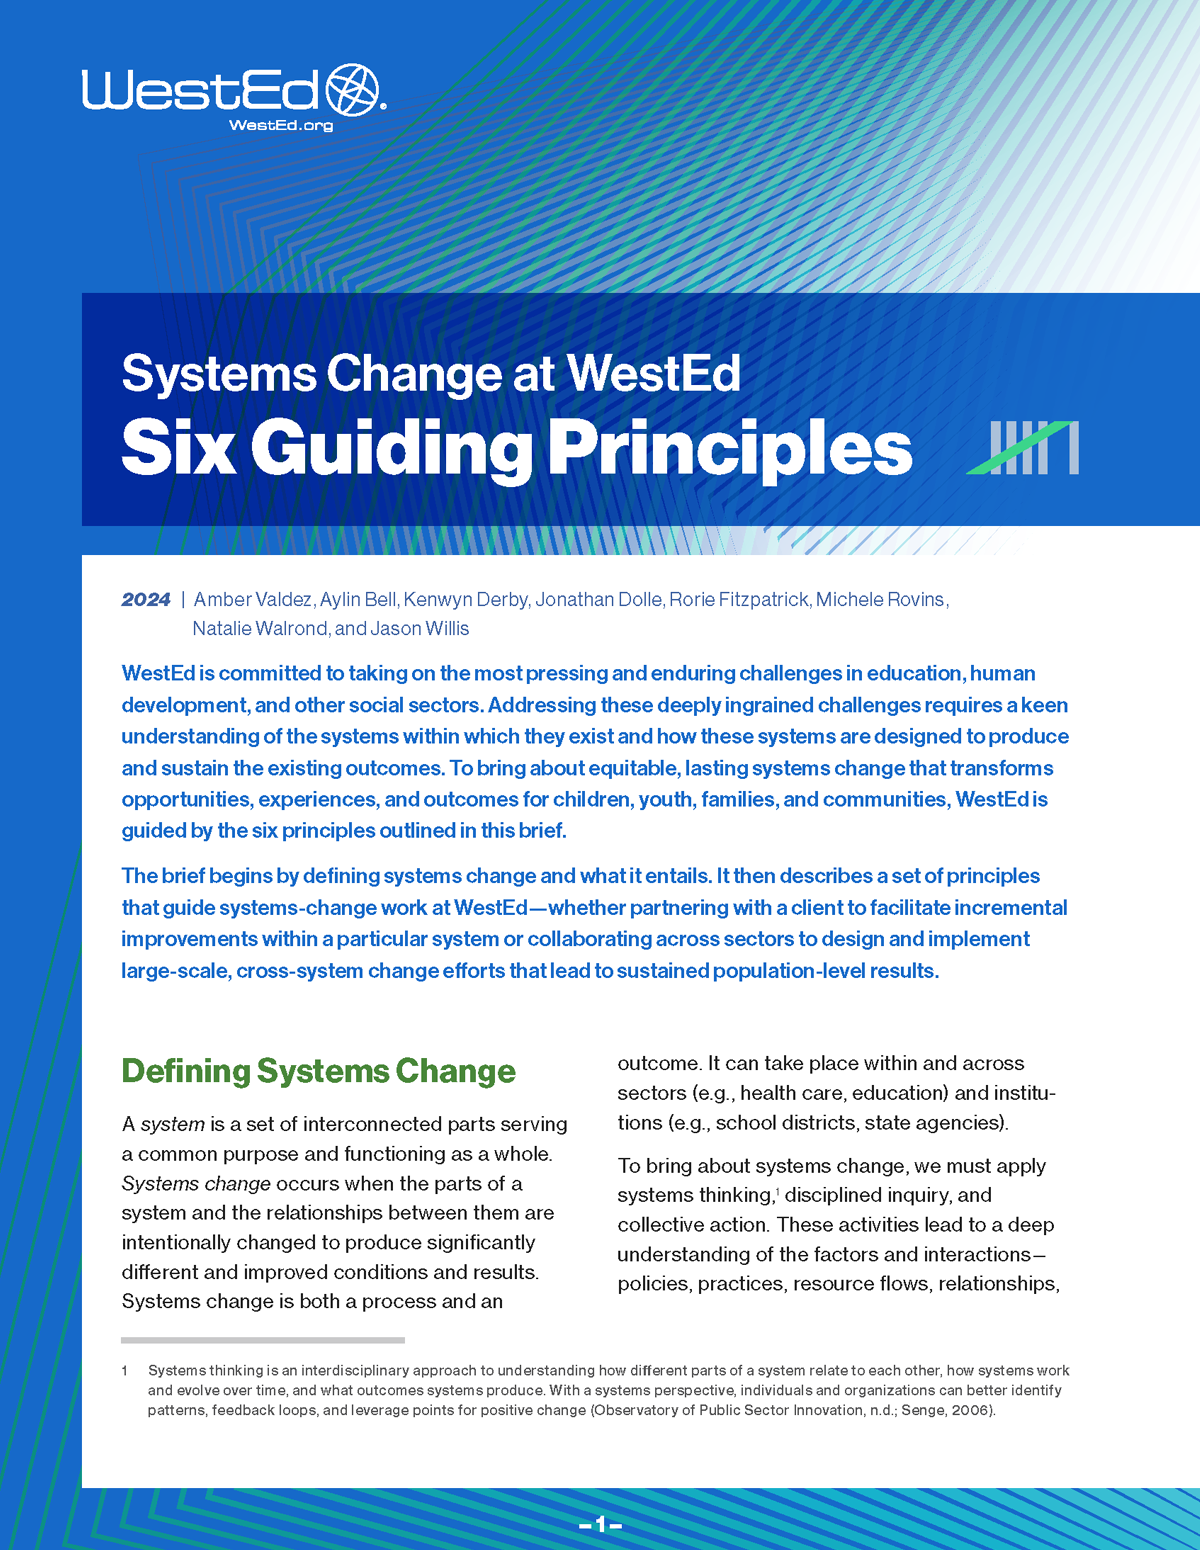 Systems Change at WestEd: Six Guiding Principles